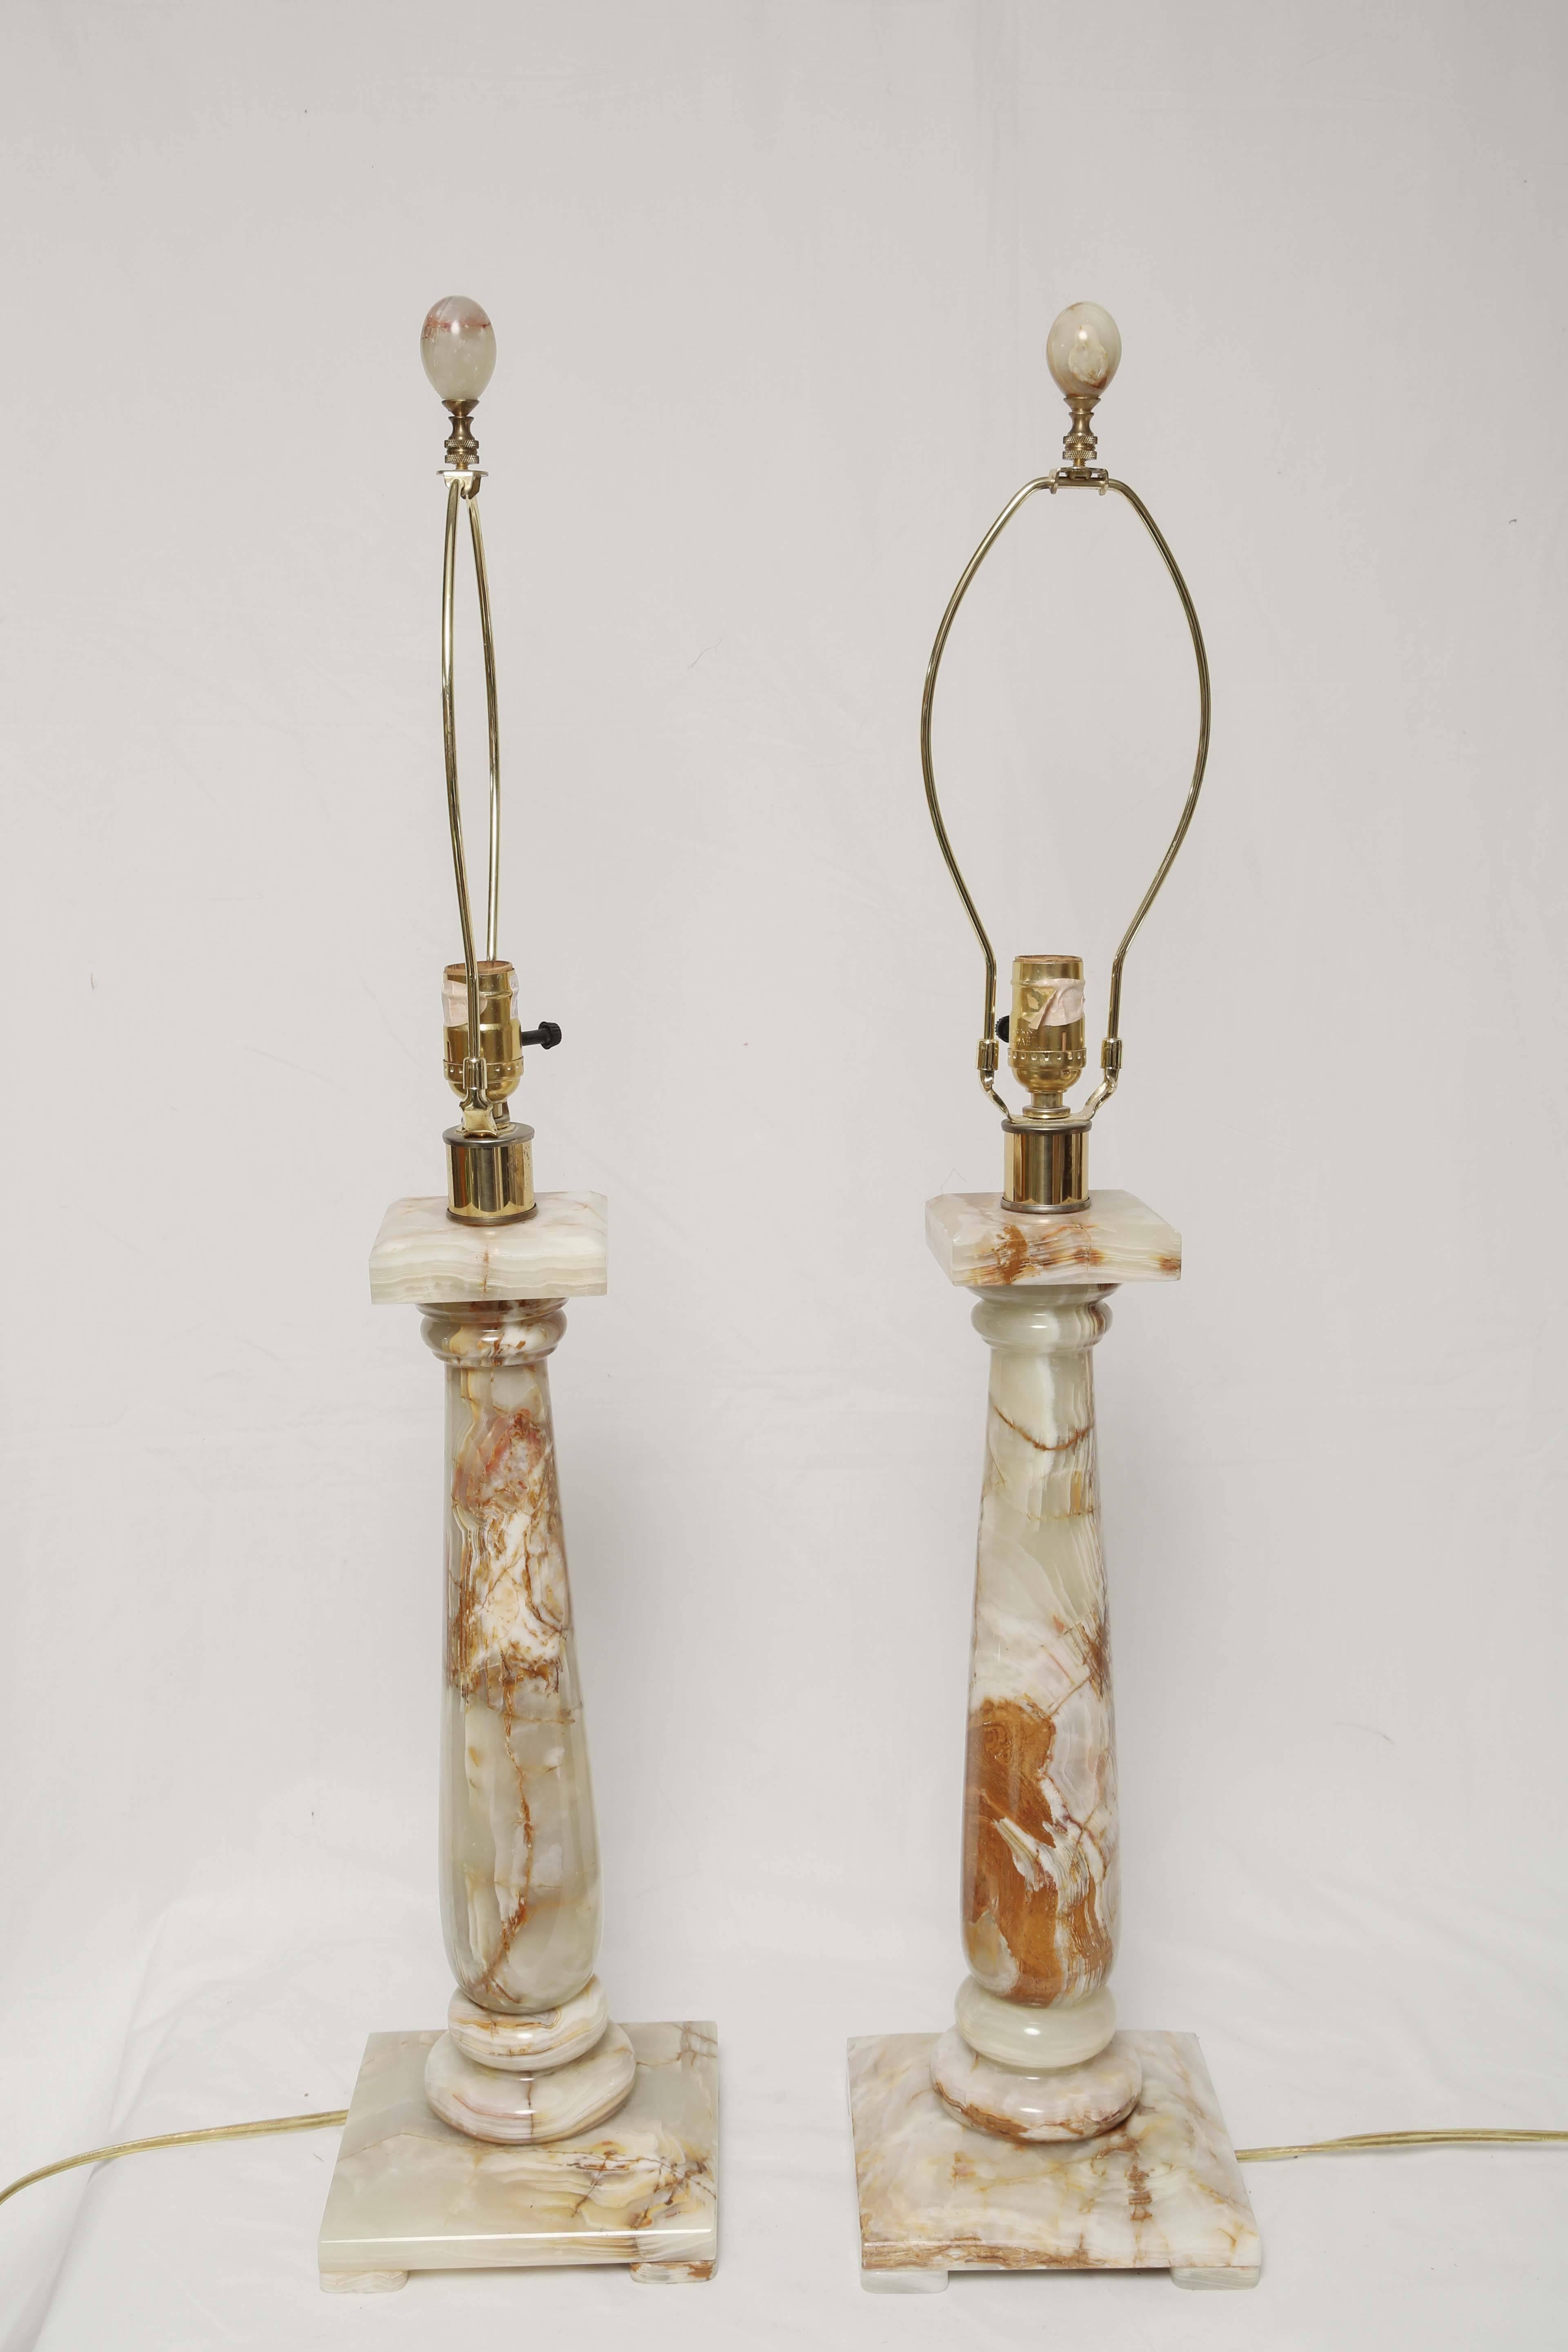 Pair of Mid-Century Modern Classical Hollywood Regency Architectural Onyx Lamps For Sale 1